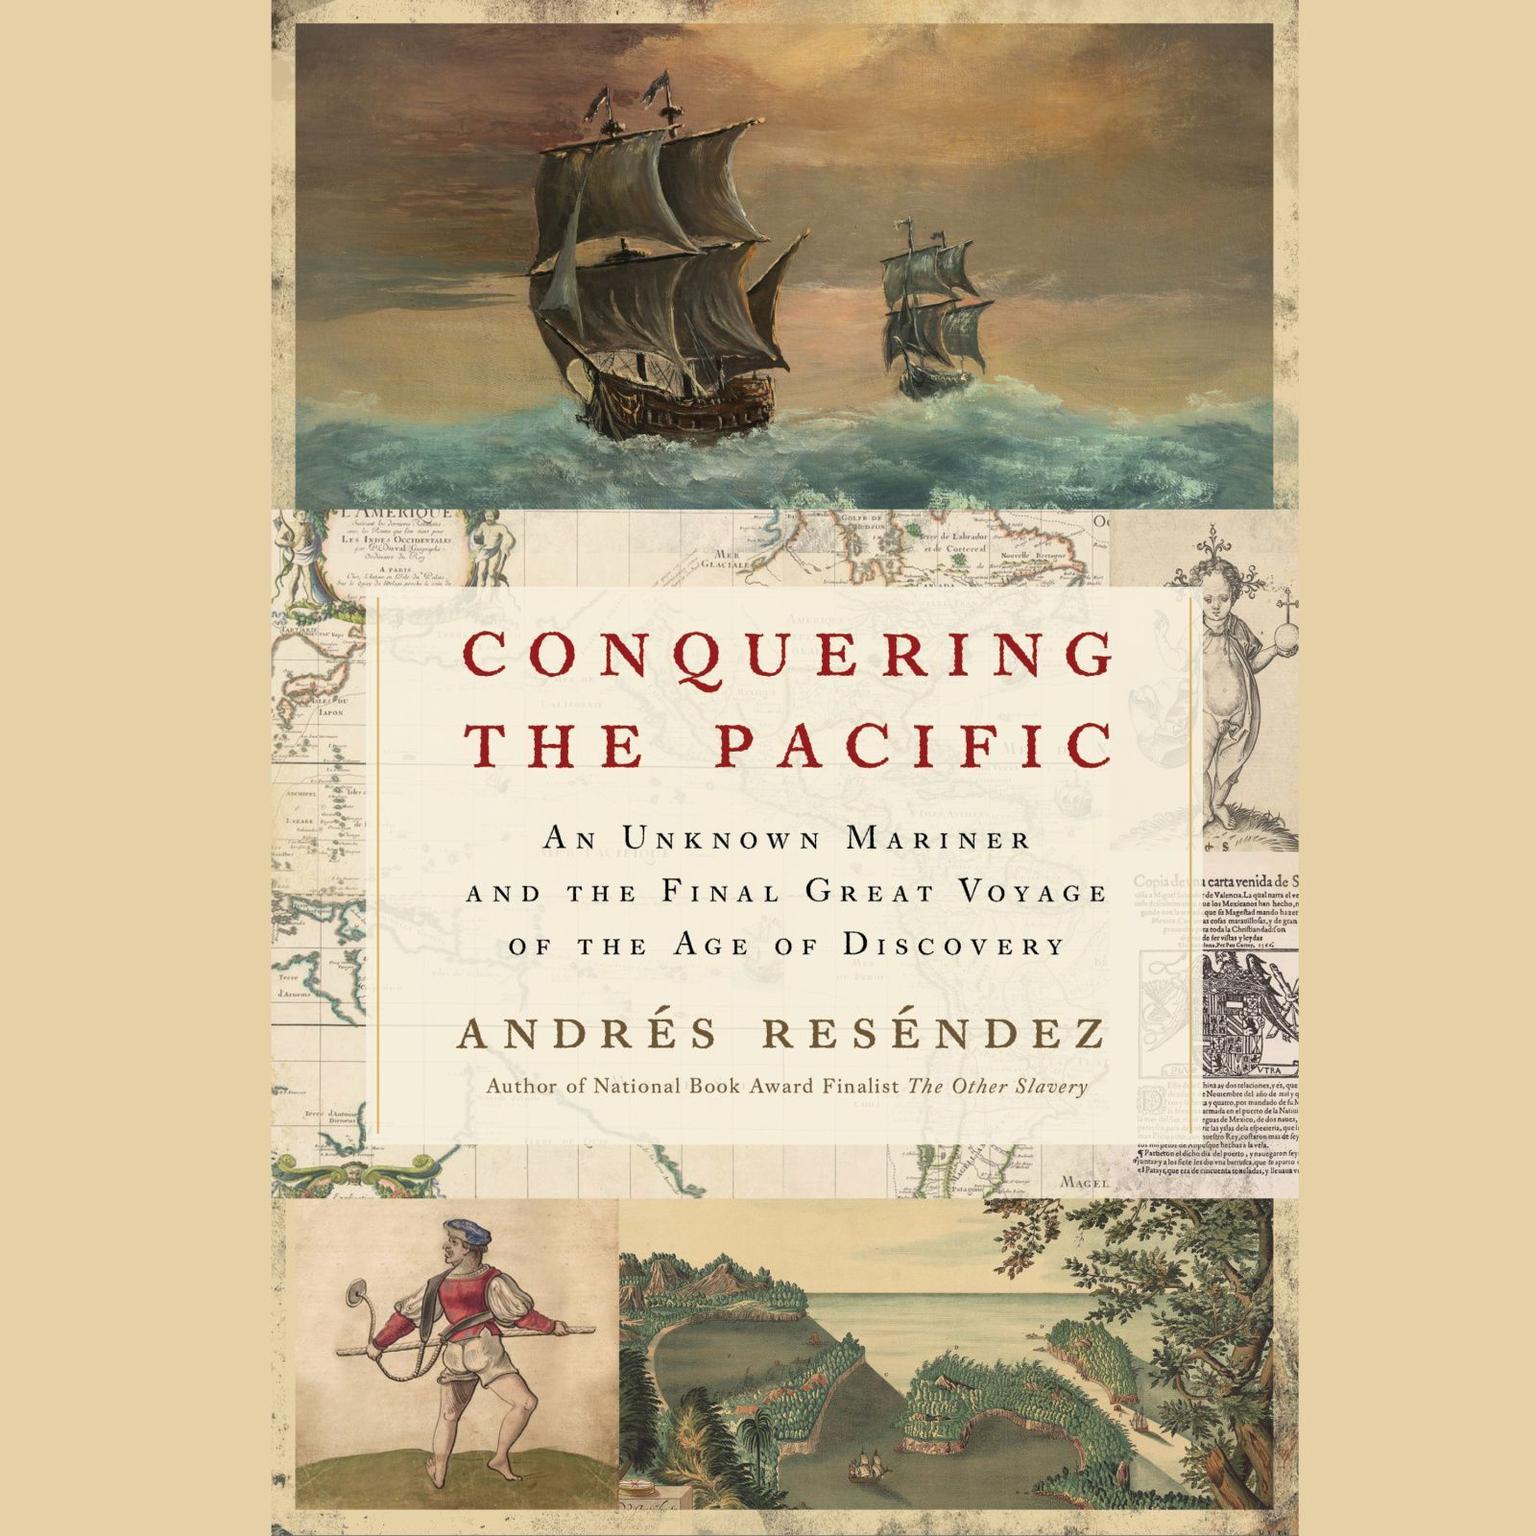 Conquering The Pacific: An Unknown Mariner and the Final Great Voyage of the Age of Discovery Audiobook, by Andrés Reséndez